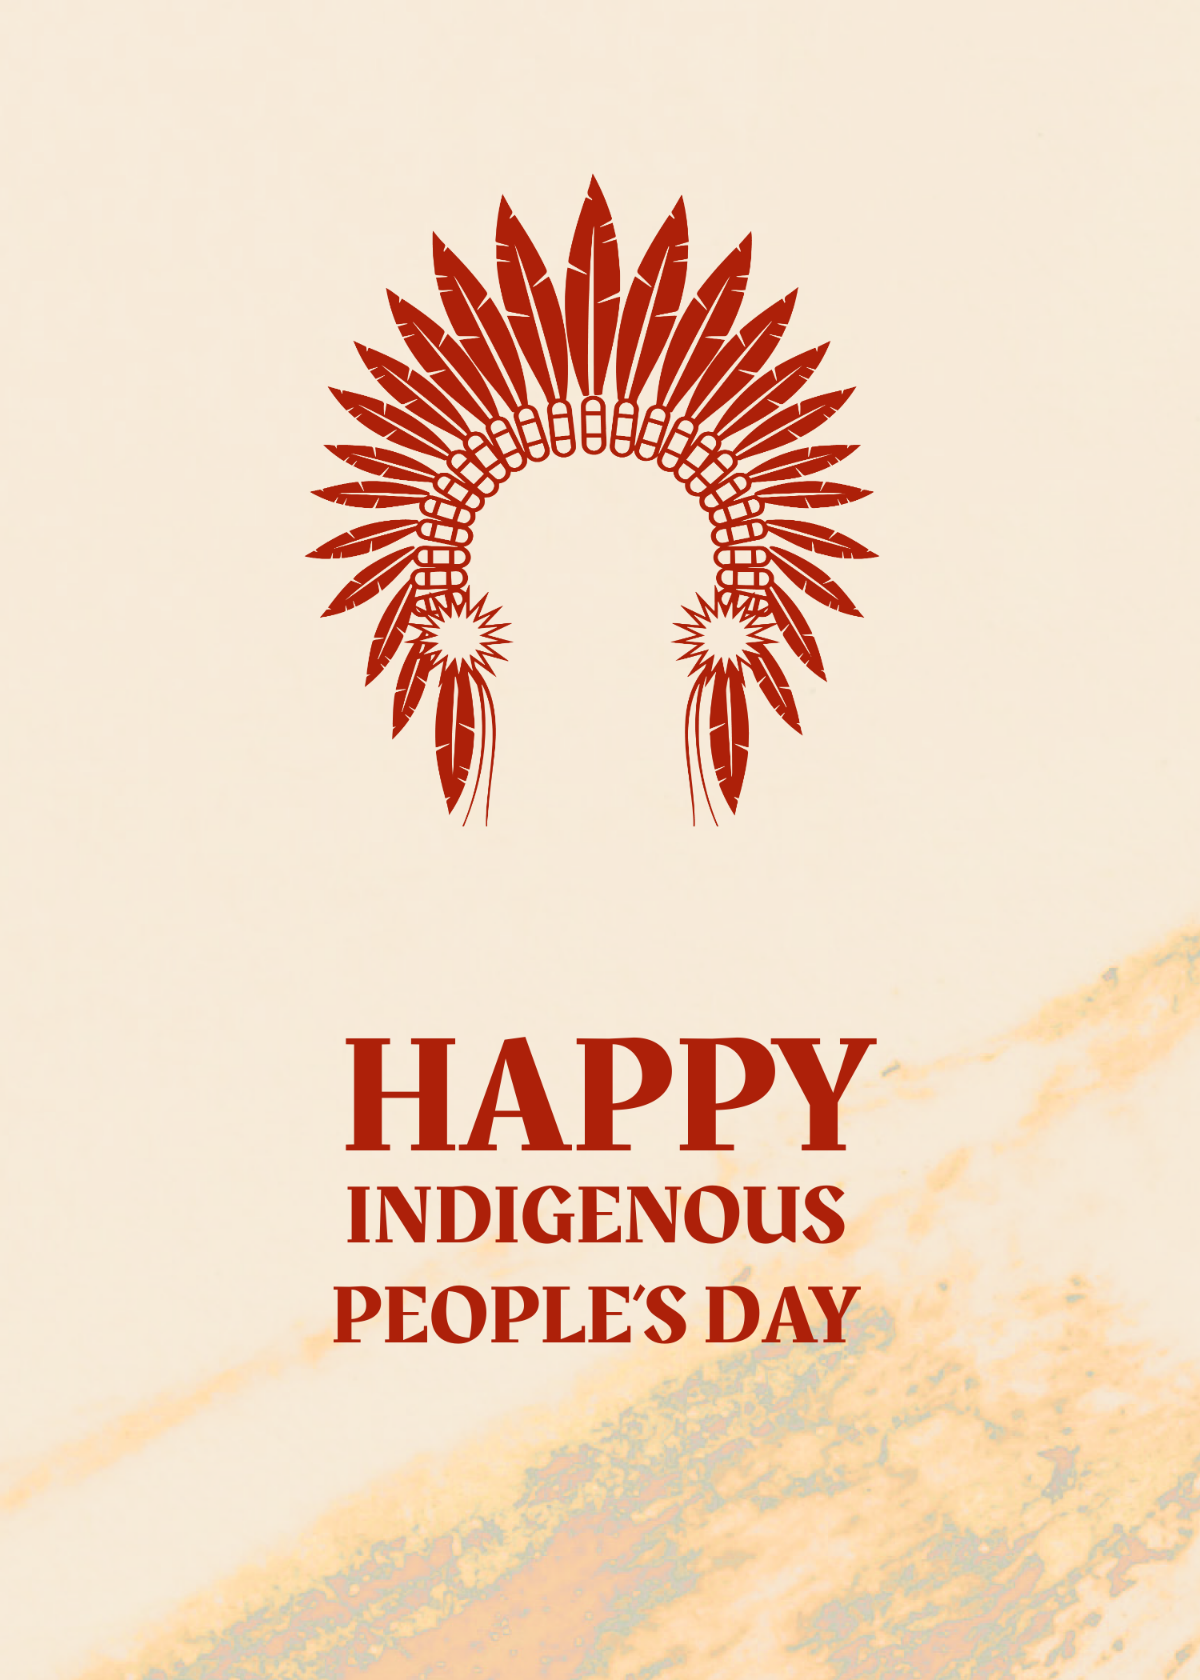 Indigenous Peoples' Day Greeting Card Template